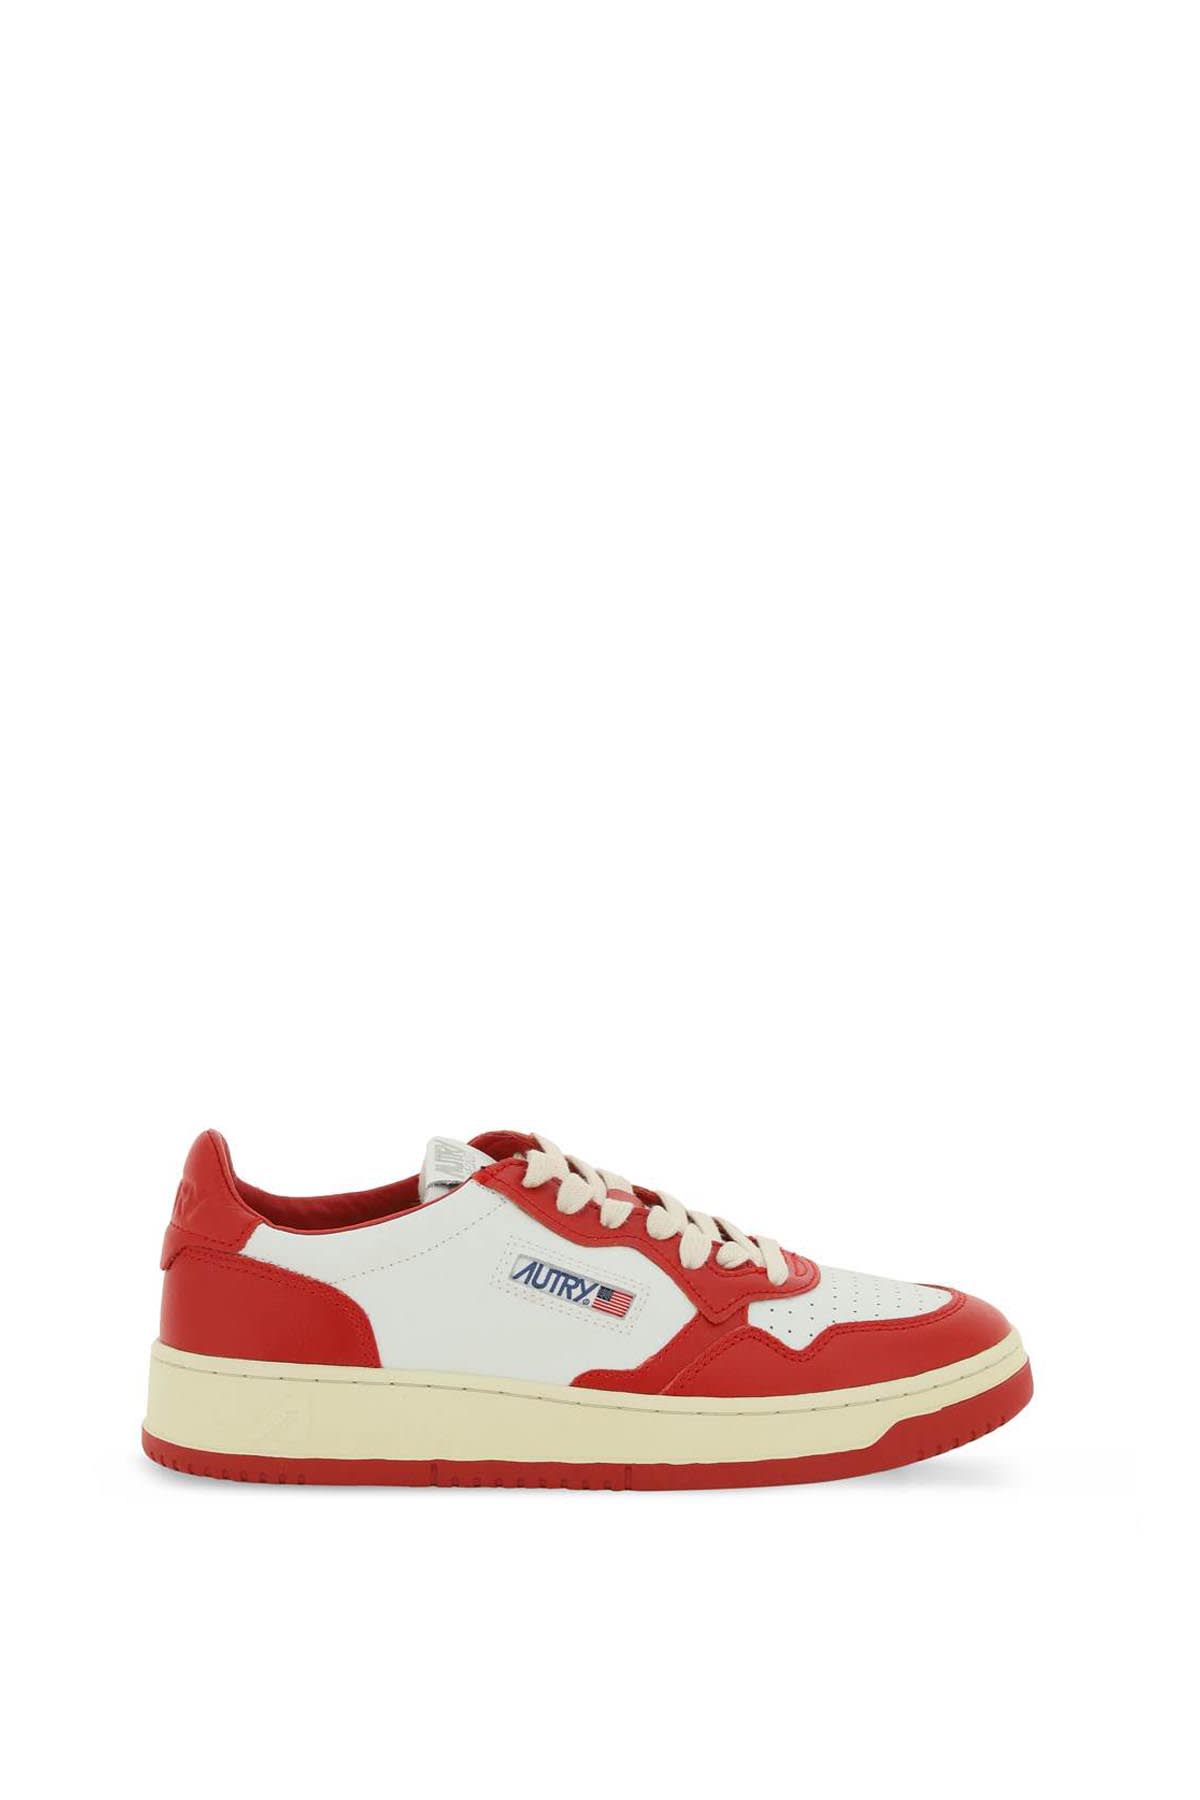 Autry Leather Medalist Low Sneakers